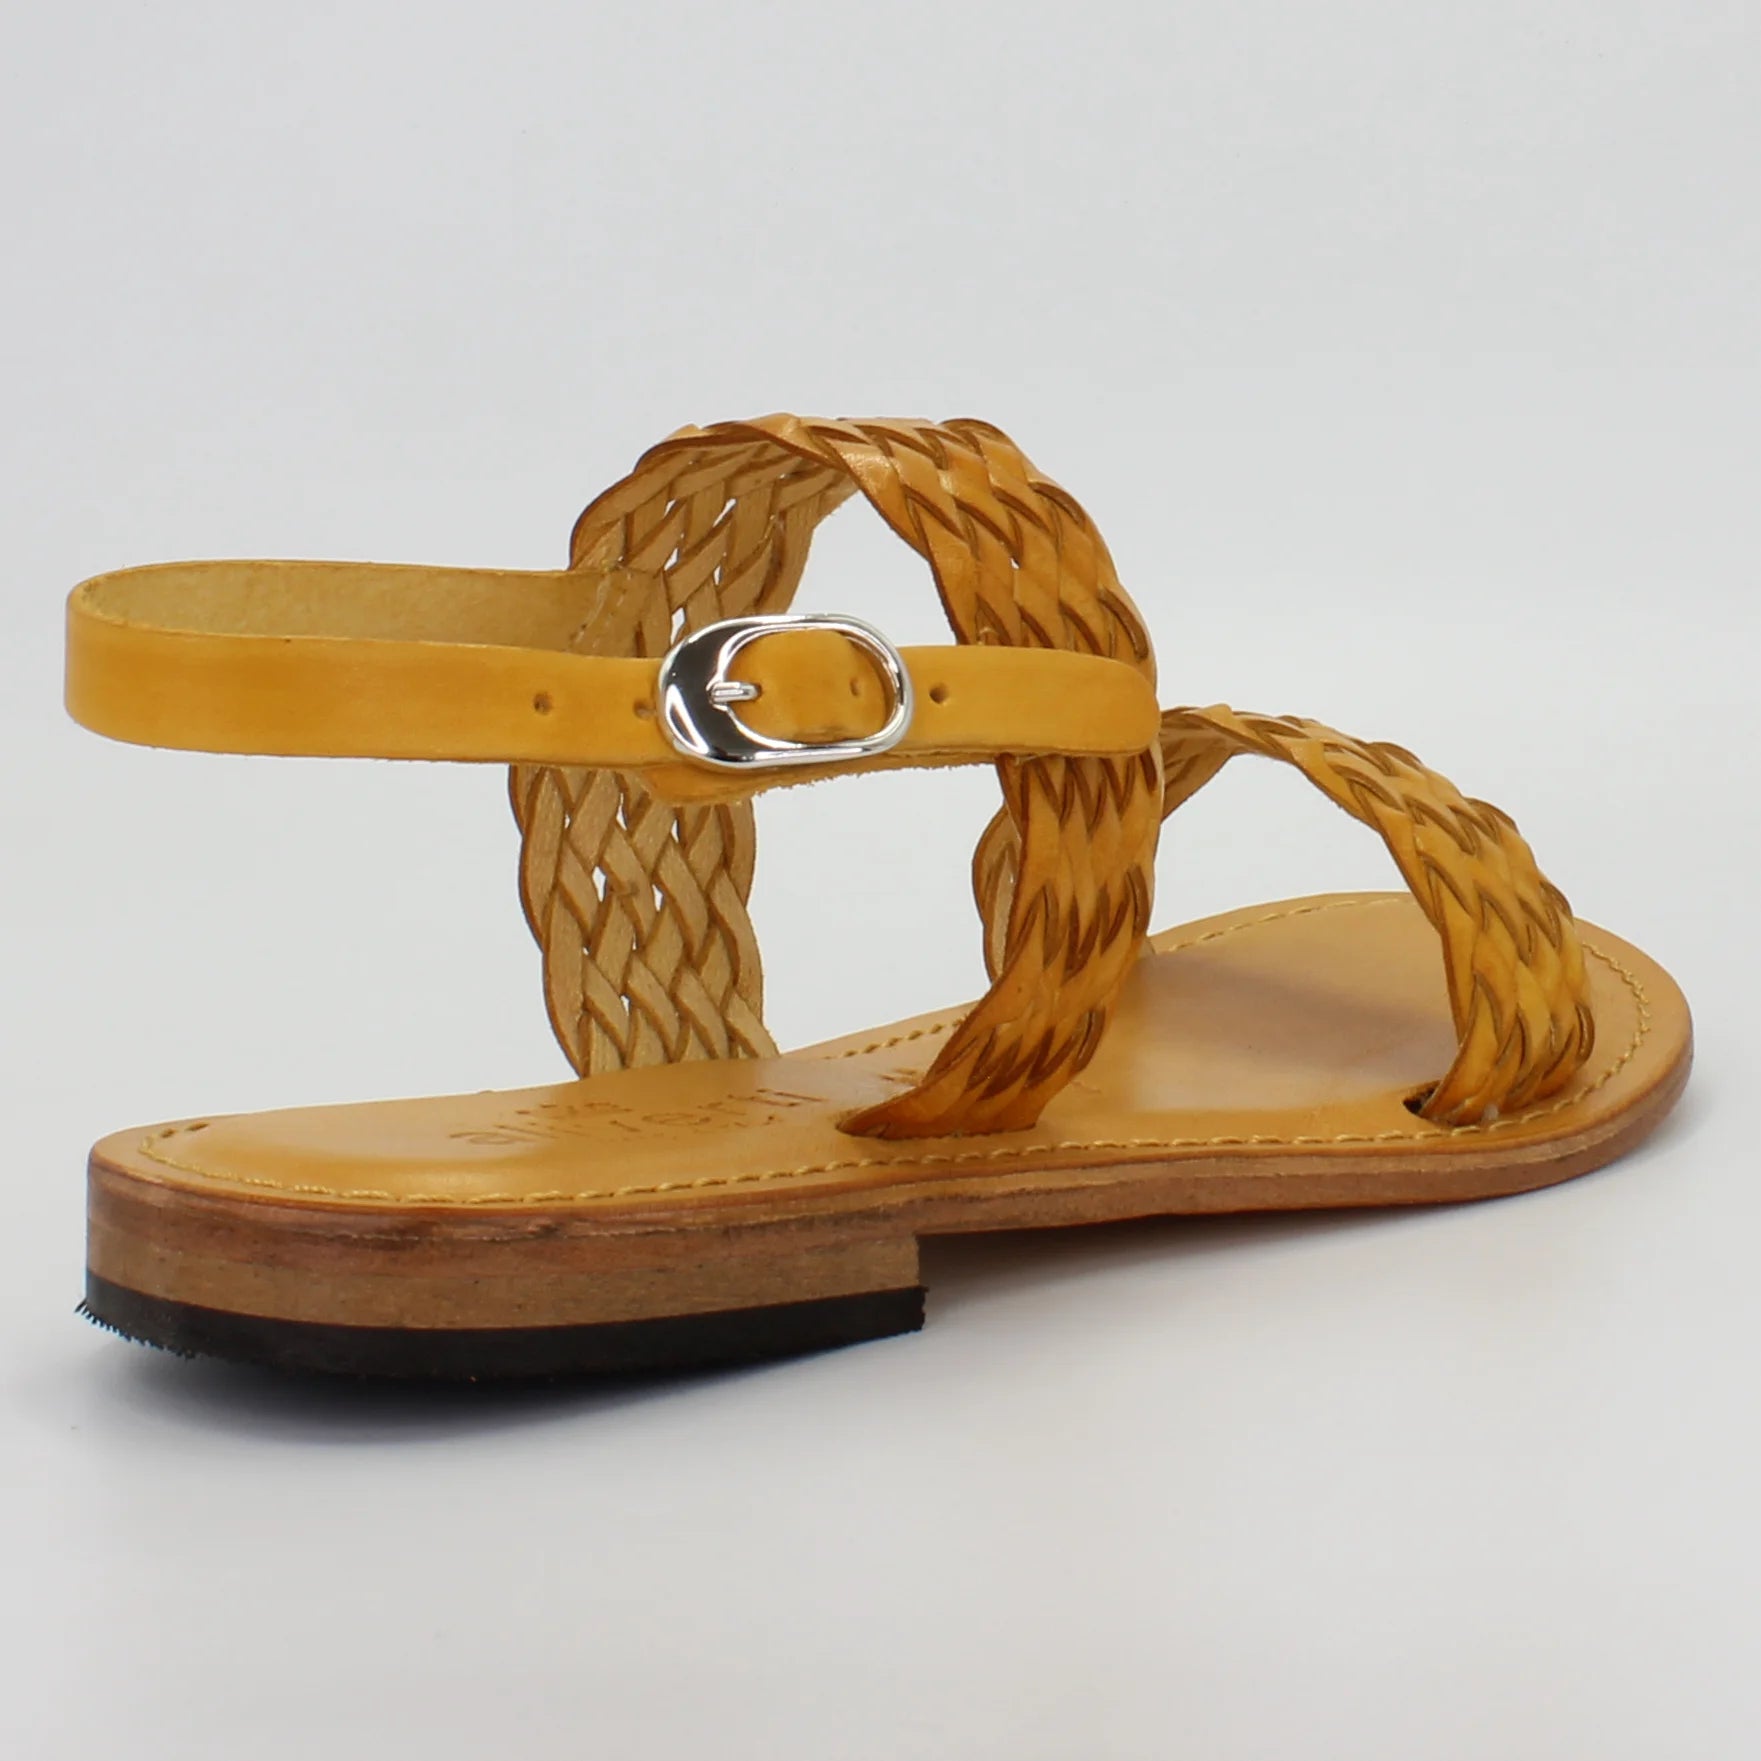 Shop Handmade Italian Leather woven sandal in giallo (1040) or browse our range of hand-made Italian shoes in leather or suede in-store at Aliverti Cape Town, or shop online. We deliver in South Africa & offer multiple payment plans as well as accept multiple safe & secure payment methods.